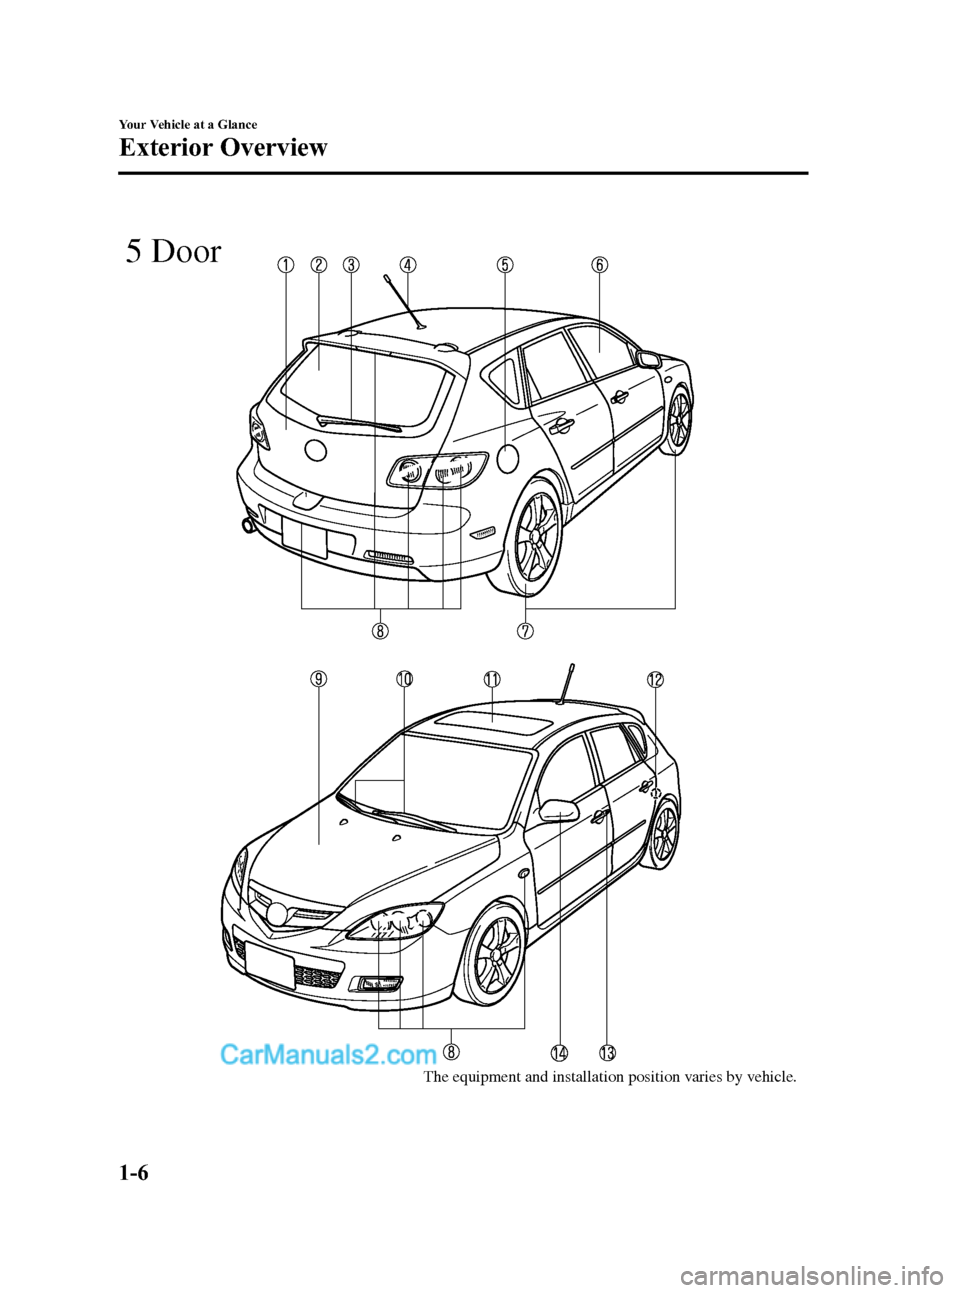 MAZDA MODEL MAZDASPEED 3 2007   (in English) User Guide Black plate (12,1)
The equipment and installation position varies by vehicle.
5 Door
1-6
Your Vehicle at a Glance
Exterior Overview
Mazda3_8V66-EA-06F_Edition3 Page12
Wednesday, August 23 2006 11:18 A